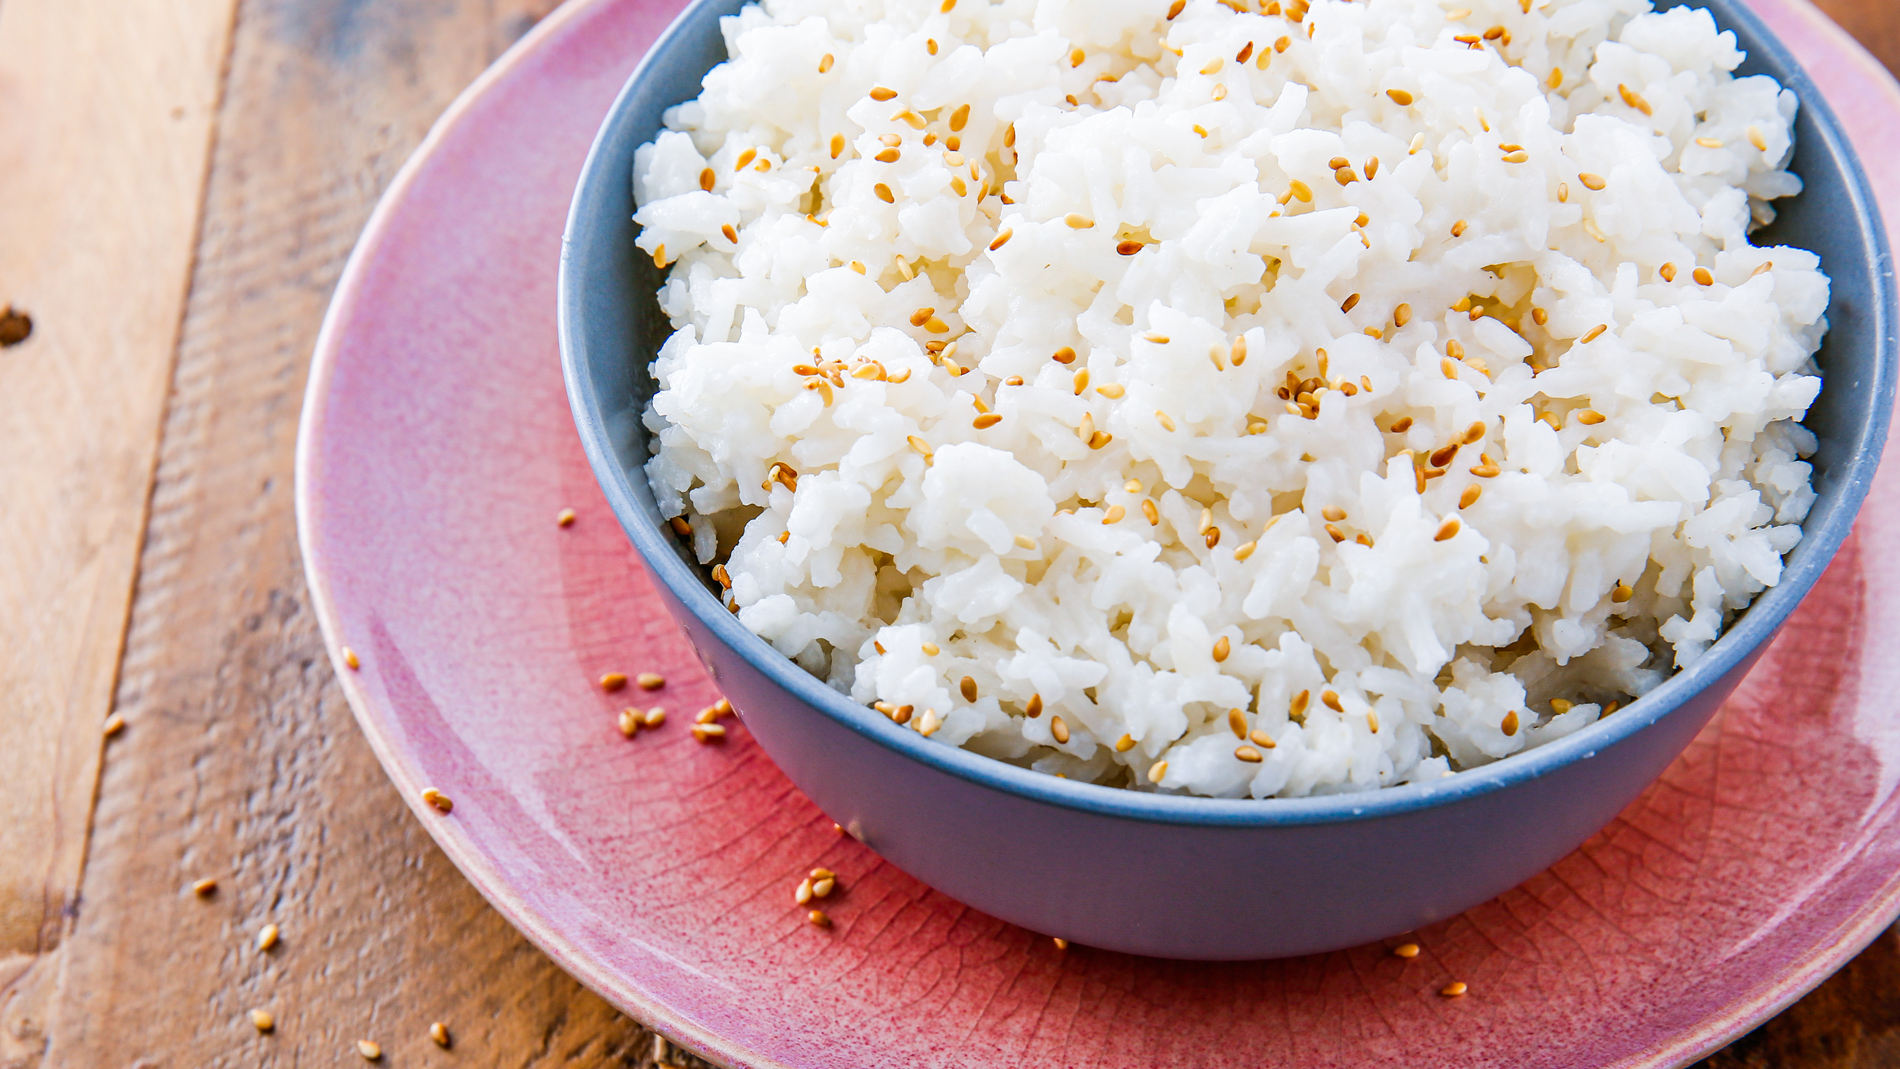 https://hips.hearstapps.com/hmg-prod/images/20190628-delish-coconut-rice-ehg-340-horizontal-1562794852.png?crop=1xw:0.8435280189423836xh;center,top